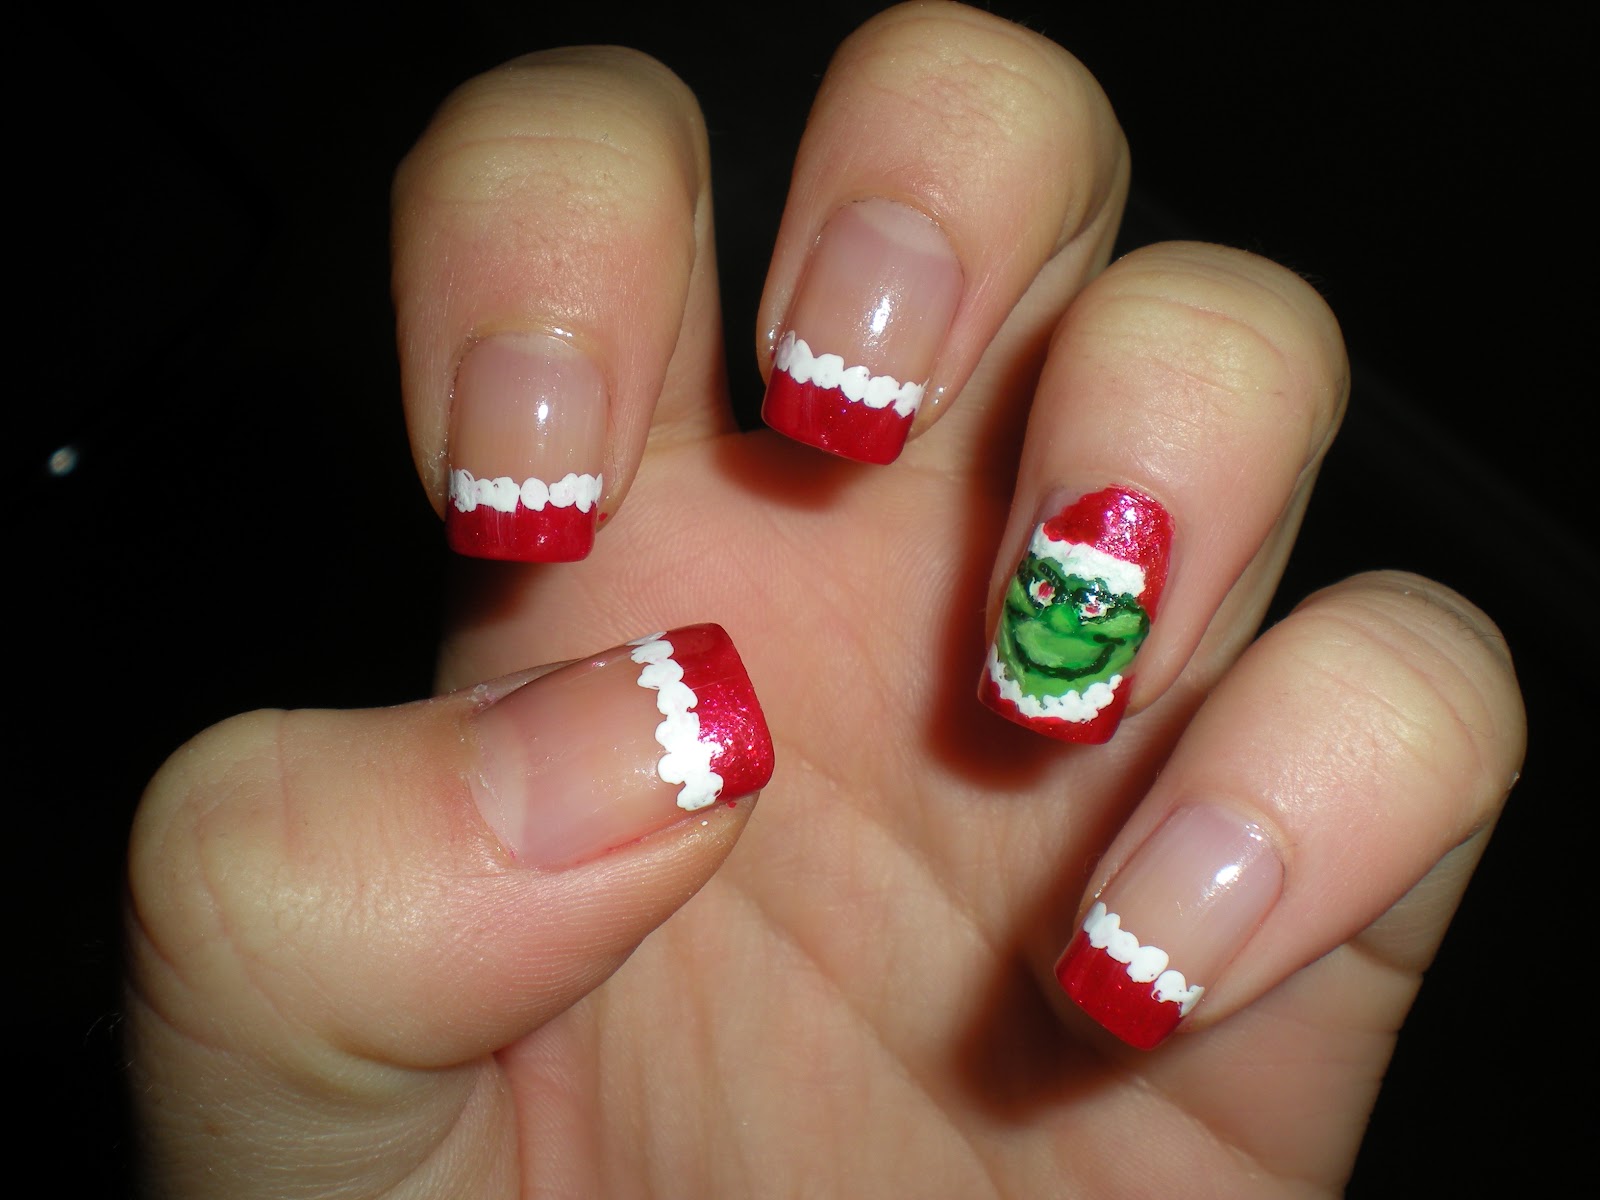 4. Festive Grinch Nails for the Holidays - wide 3